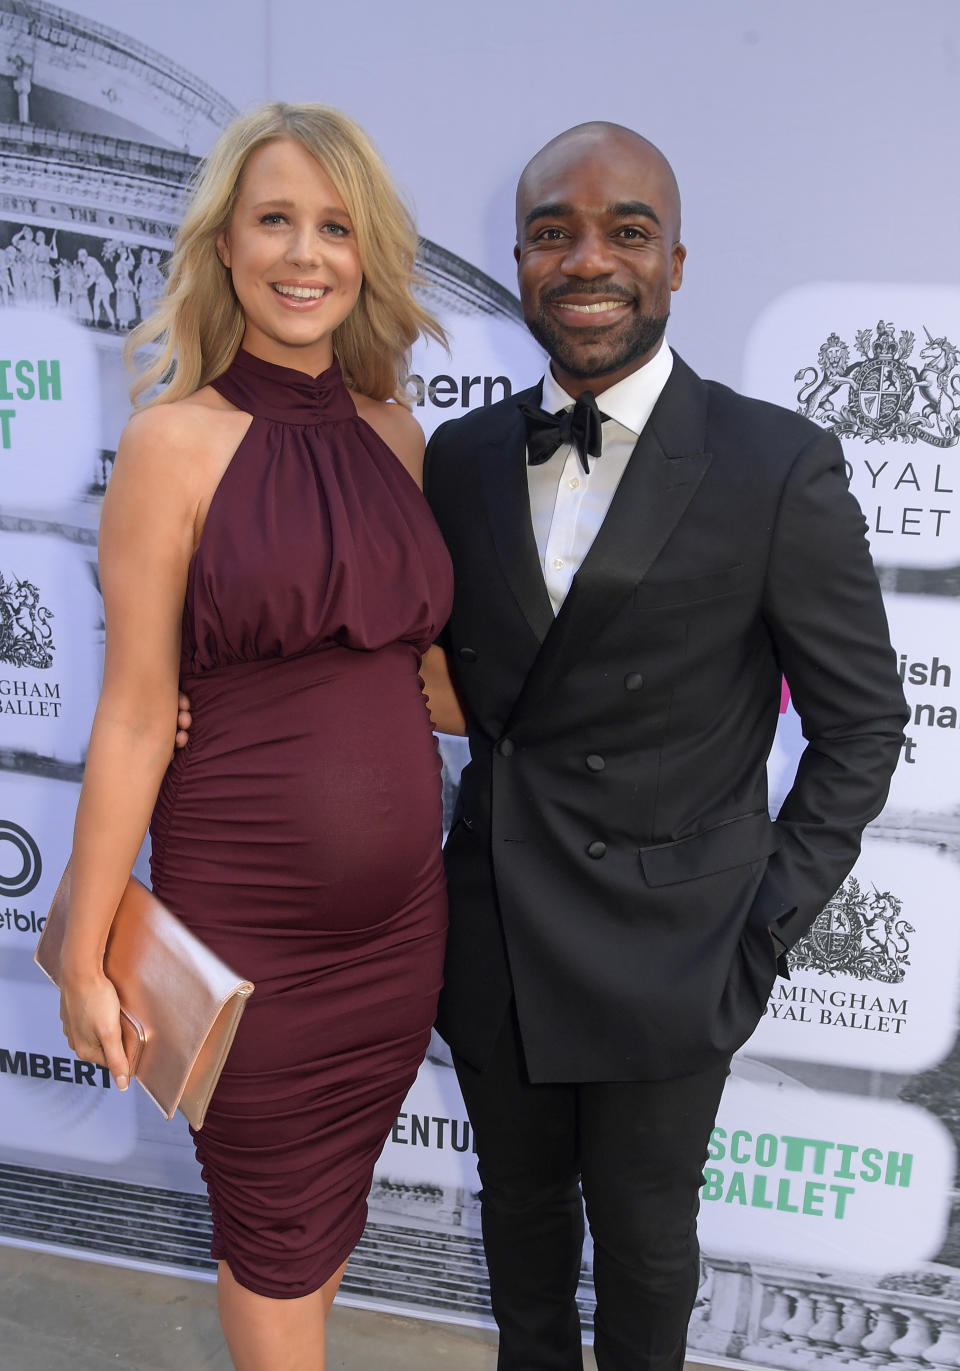 LONDON, ENGLAND - JUNE 03: Portia Oduba (L) and Ore Oduba attend the inaugural British Ballet Charity Gala presented by Dame Darcey Bussell at The Royal Albert Hall on June 03, 2021 in London, England. (Photo by David M. Benett/Dave Benett/Getty Images)